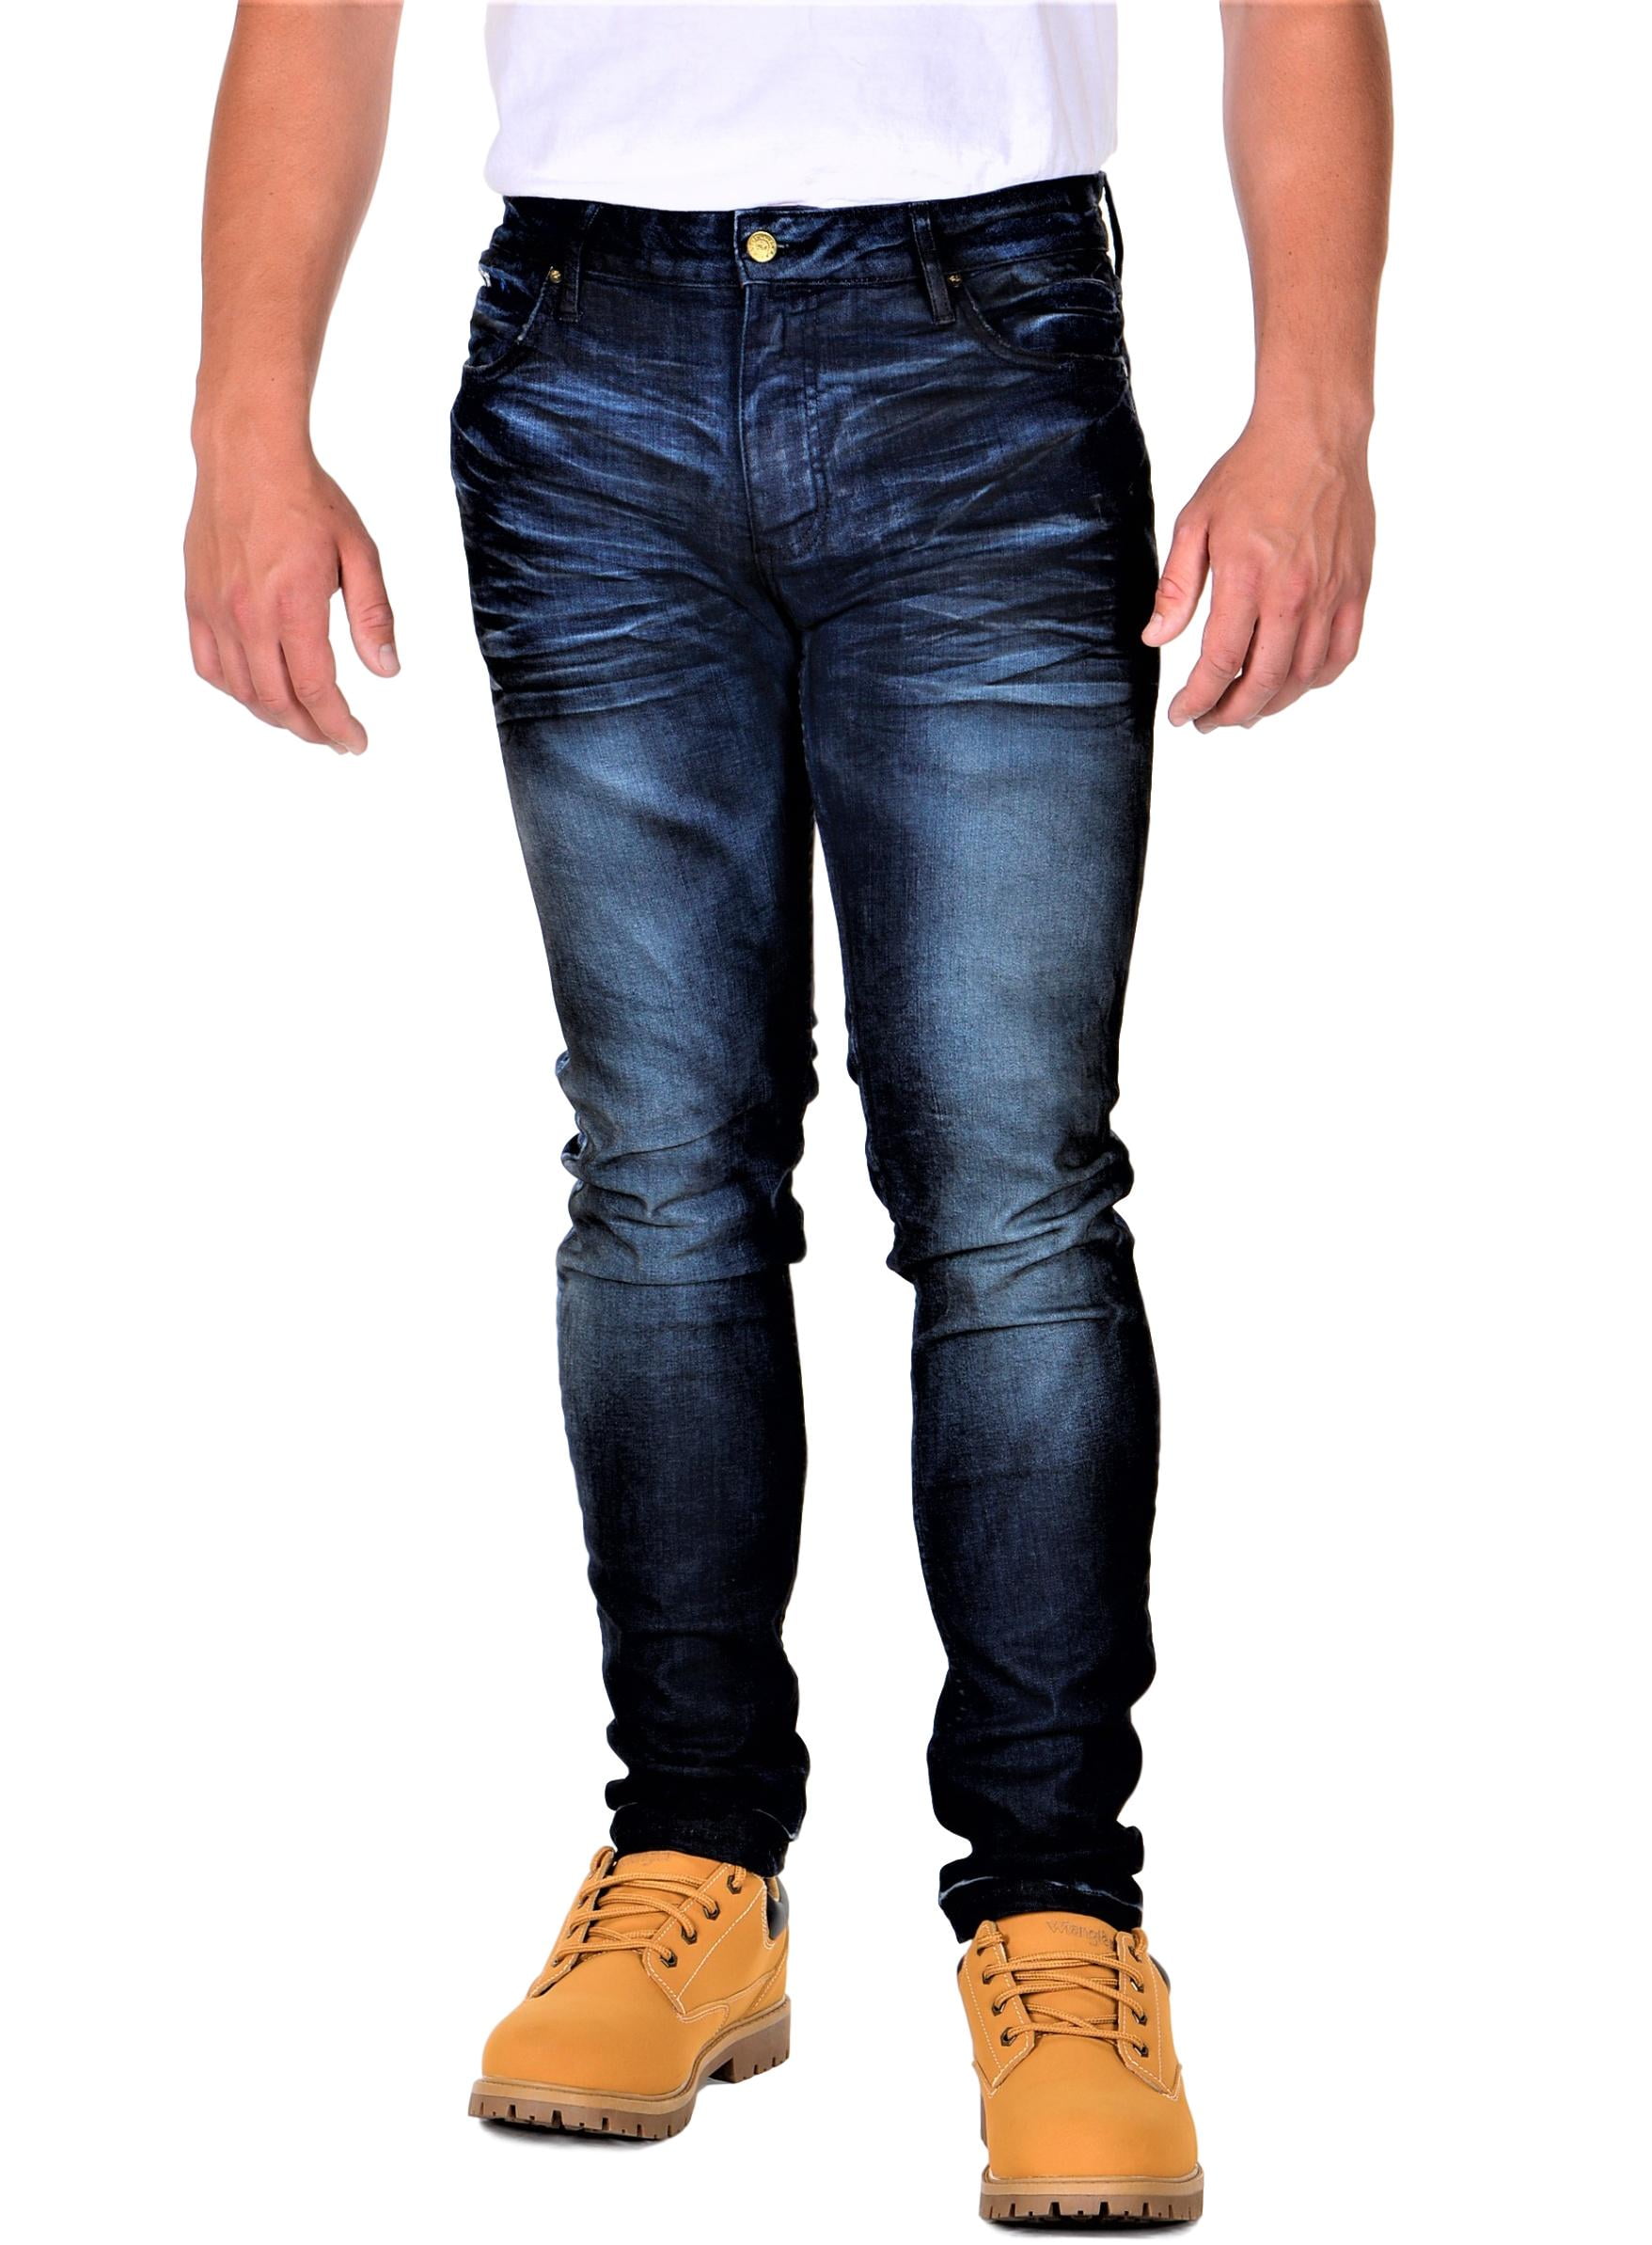 robin jeans red label